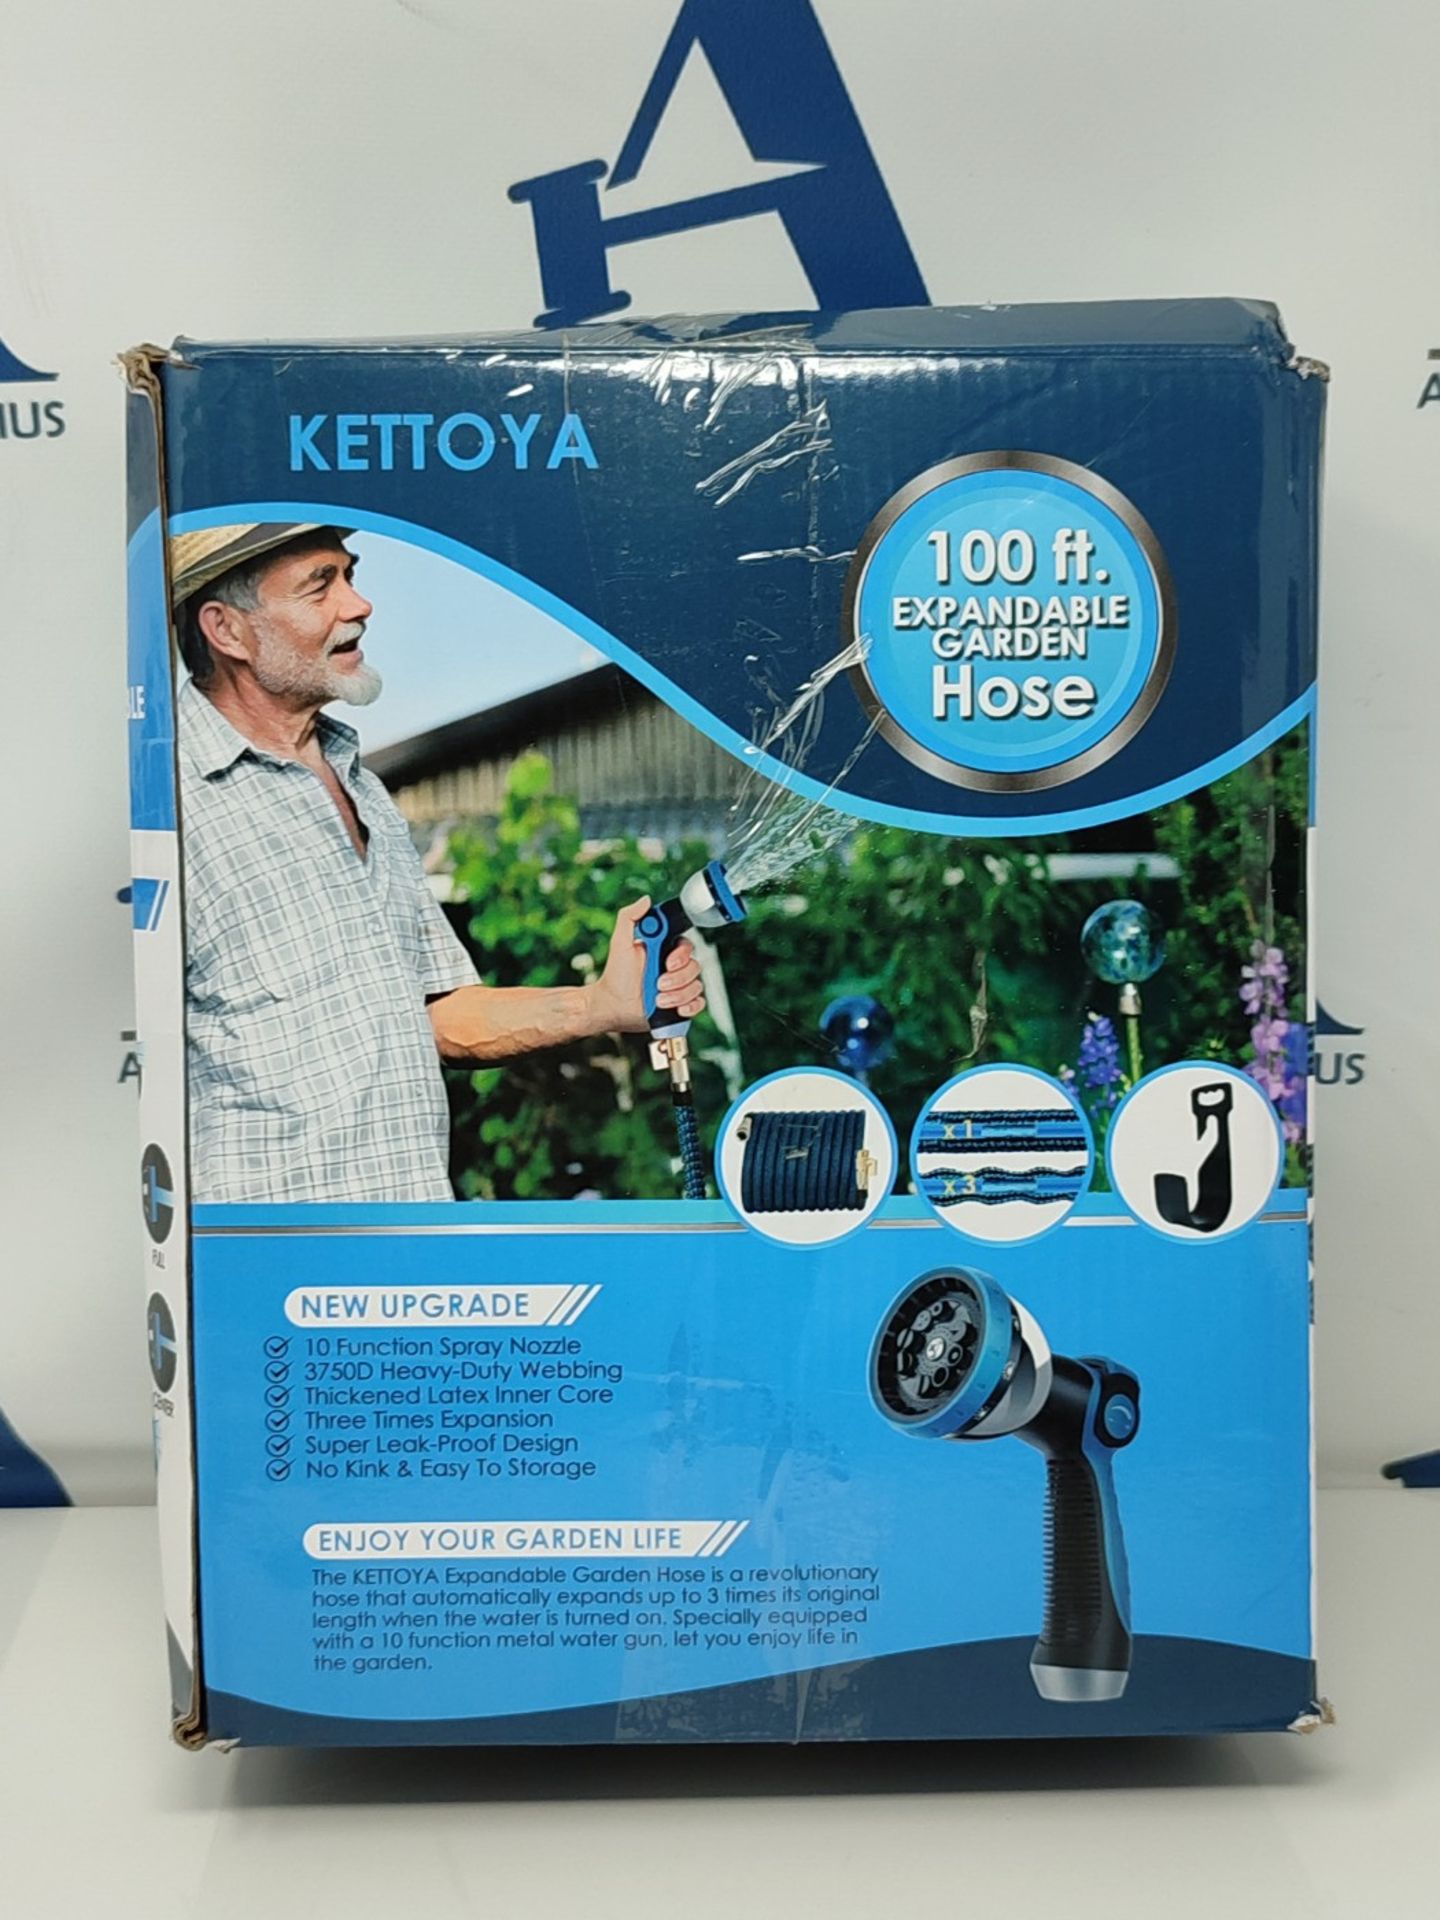 KETTOYA 100FT Expandable Garden Hose, Flexible Water Hose with 10-Pattern Spray Nozzle - Image 5 of 10